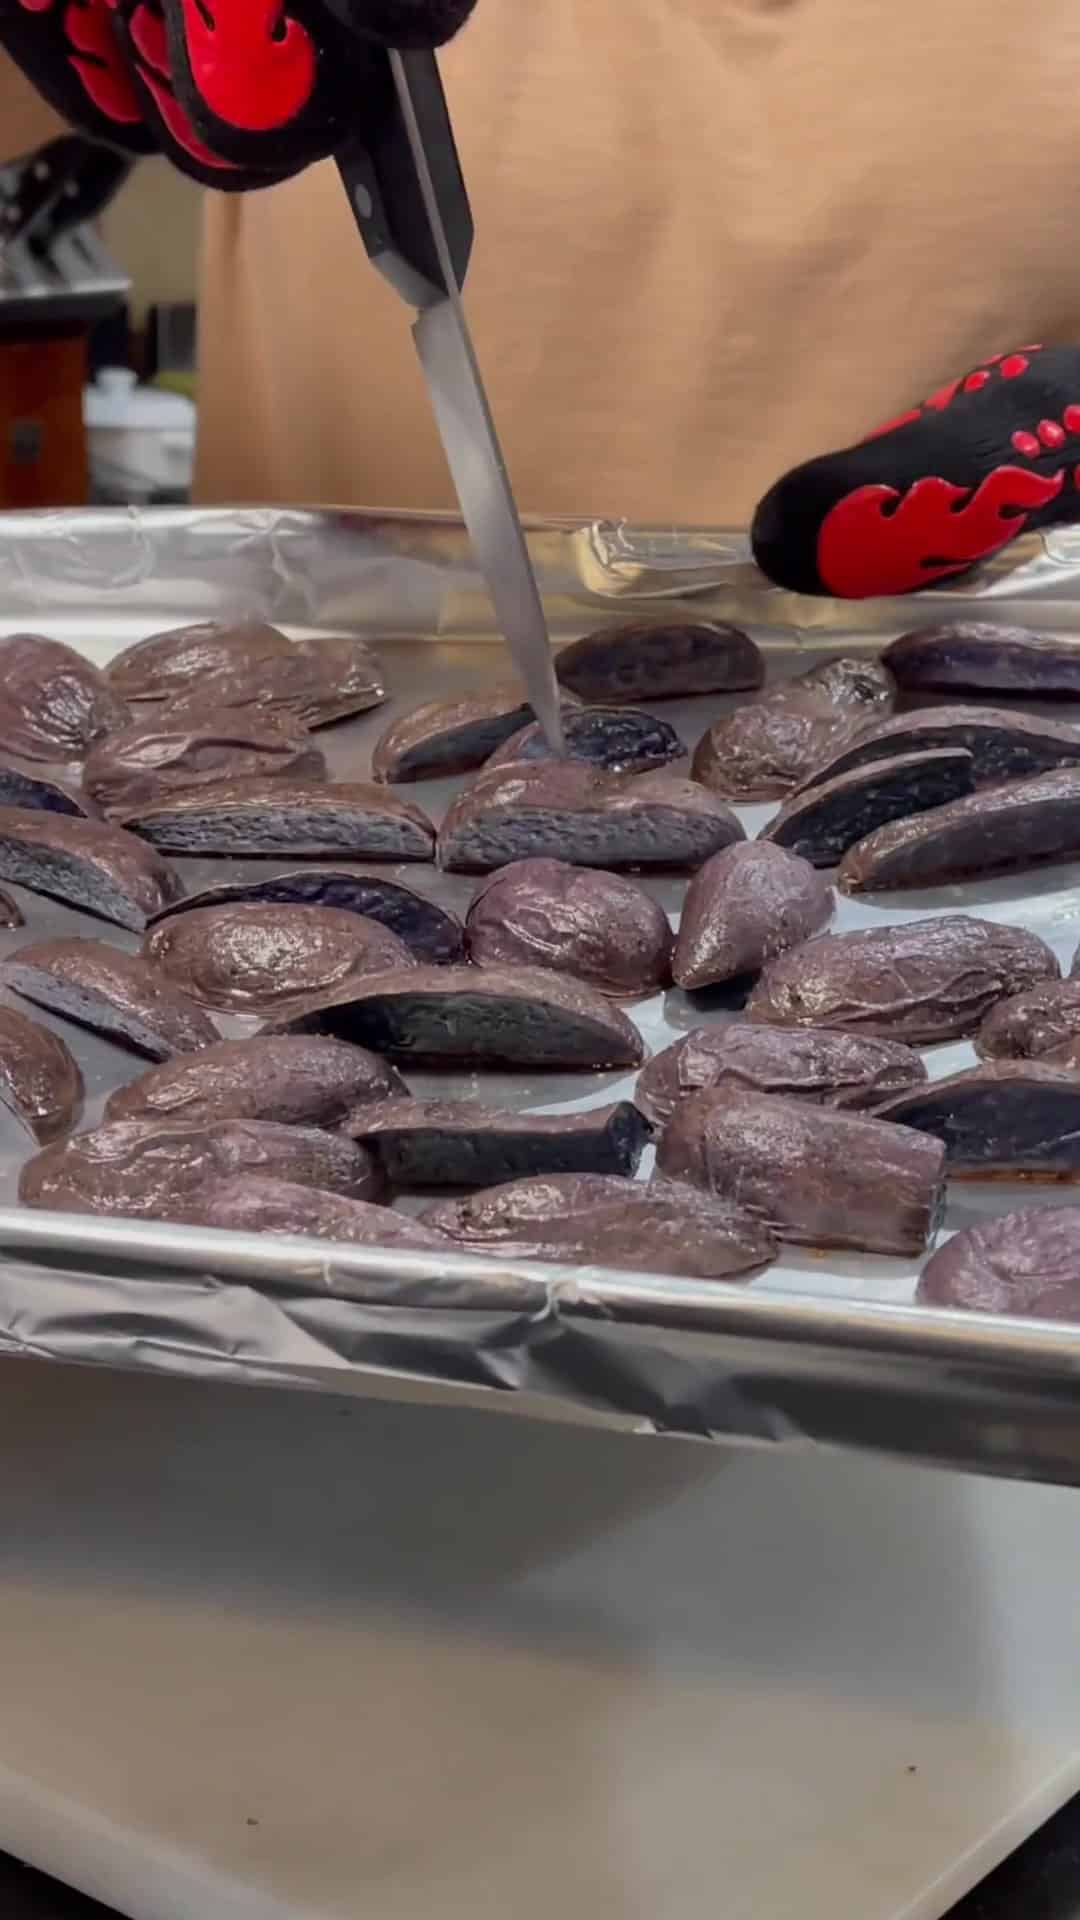 A knife being pierced into a cooked purple potato.